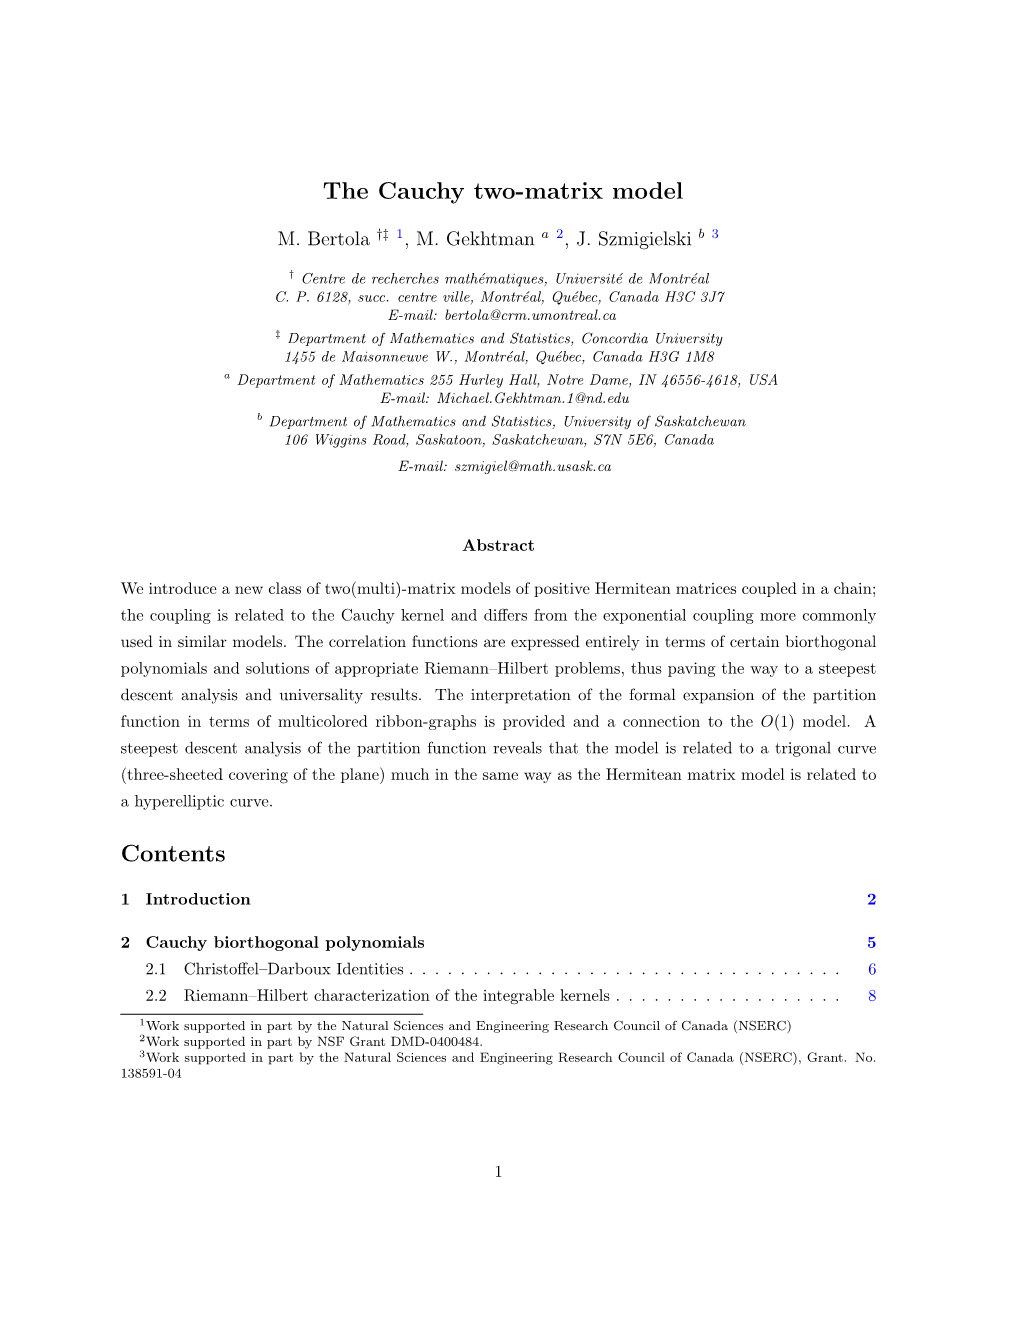 The Cauchy Two-Matrix Model Contents